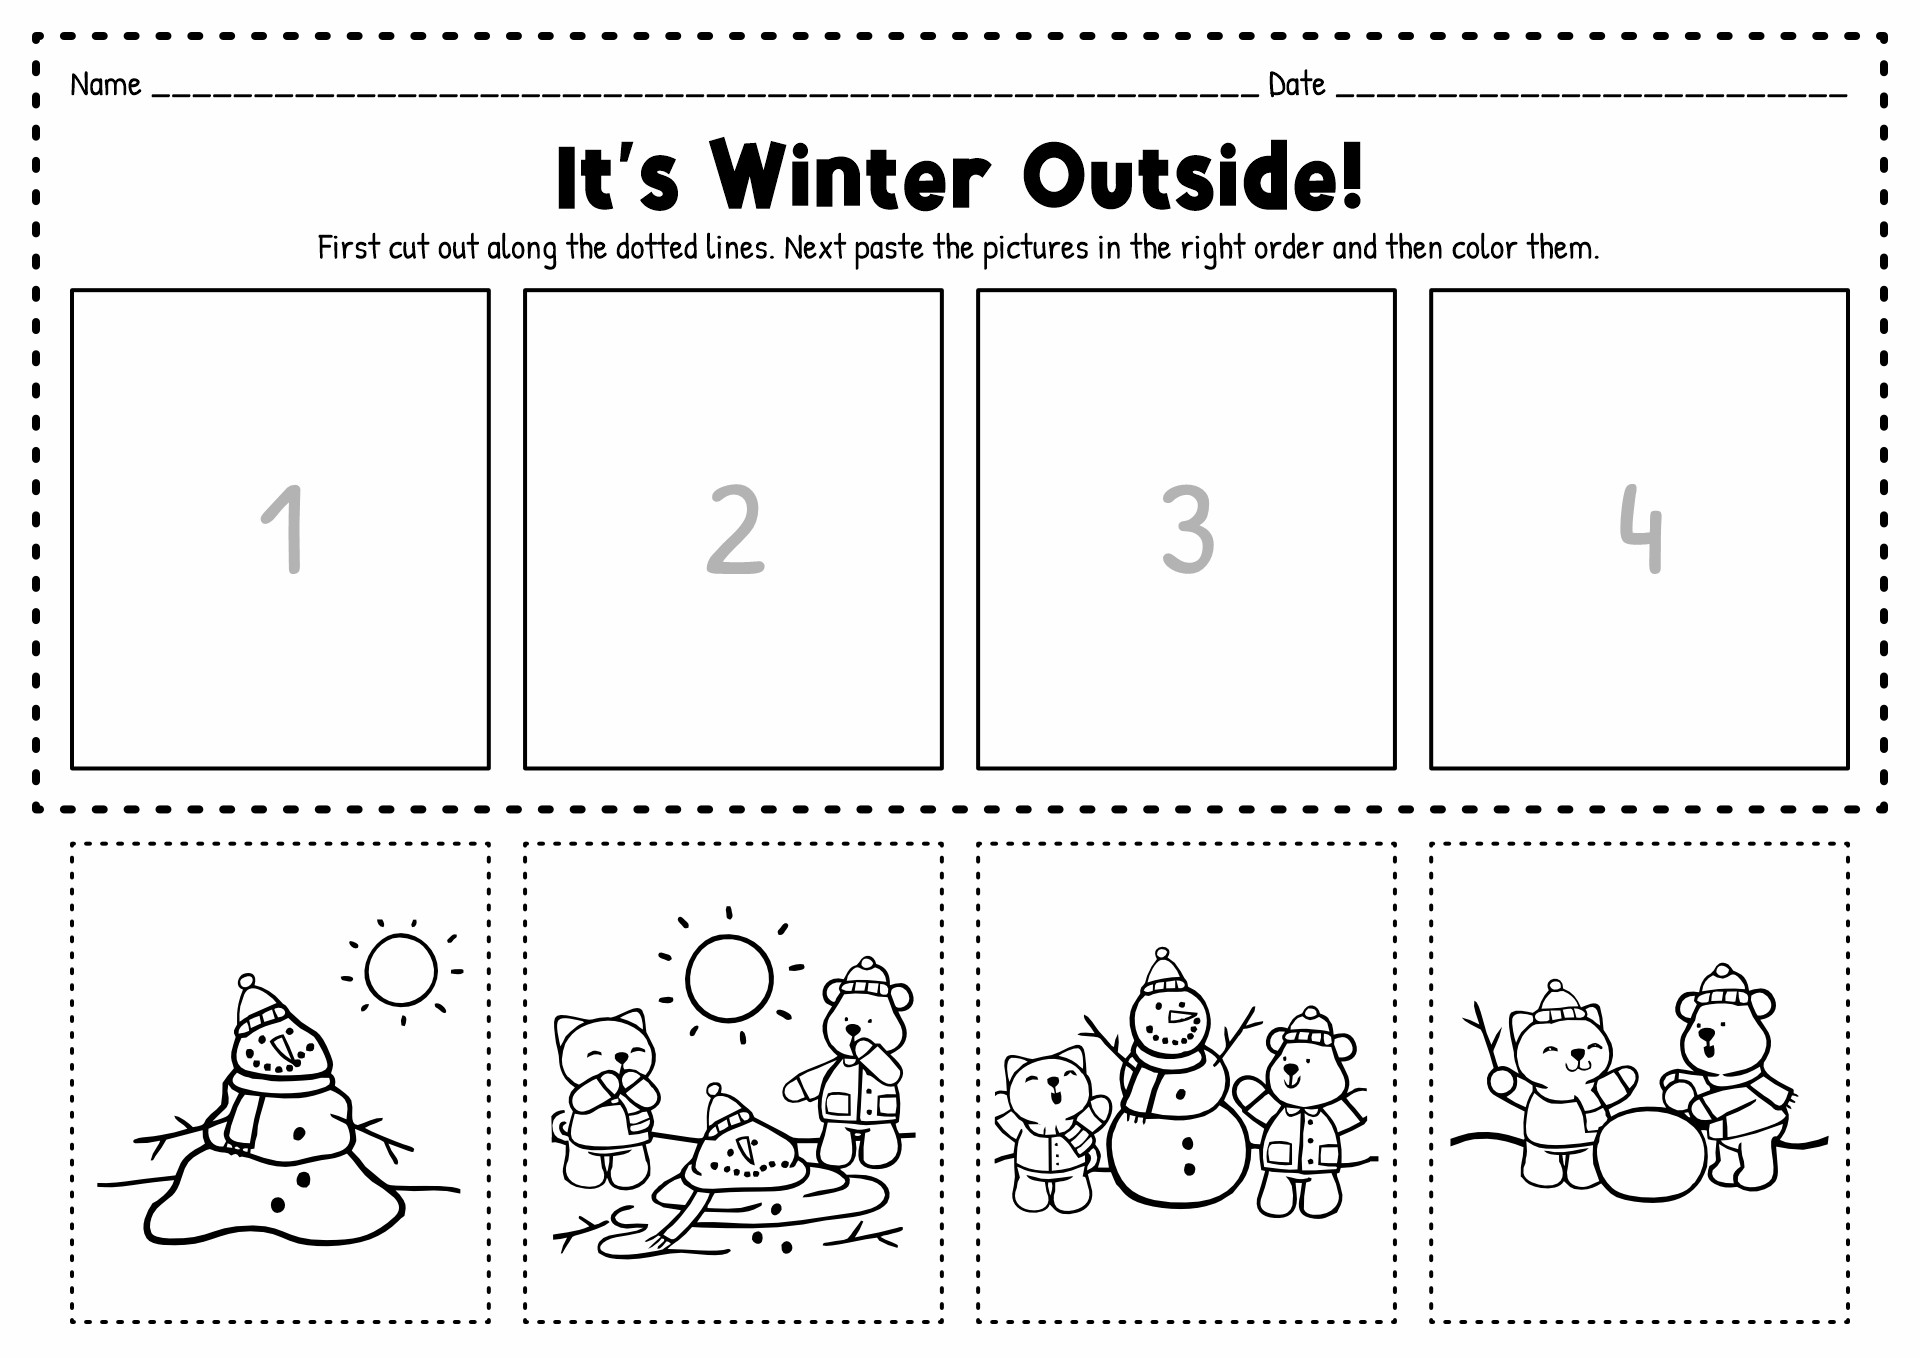 15 Best Images of Short Story Worksheets - Story ...